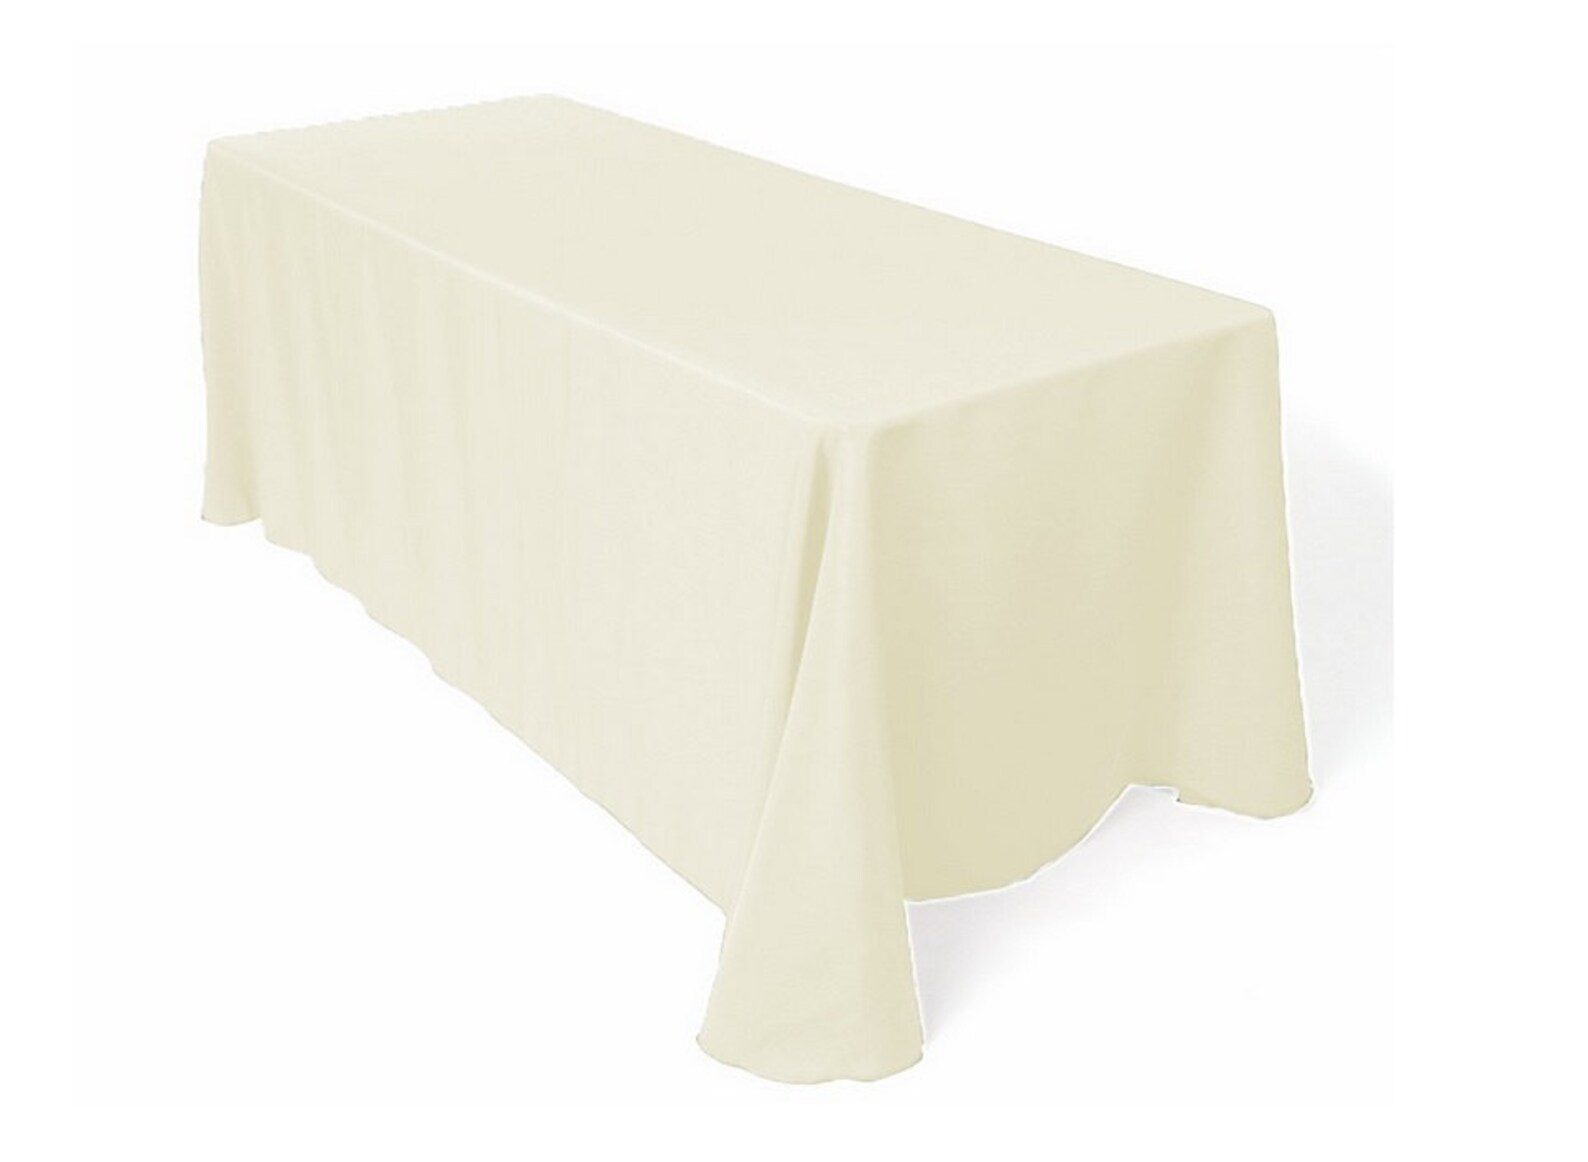 Ivory table cloth hire Perth <a href='#' class='view-taggged-products' data-id=6794>Click to View Products</a><div class='taggged-products-slider-wrap'><div class='heading-tag-products'></div><div class='taggged-products-slider'></div></div><div class='loading-spinner'><i class='fa fa-spinner fa-spin'></i></div>